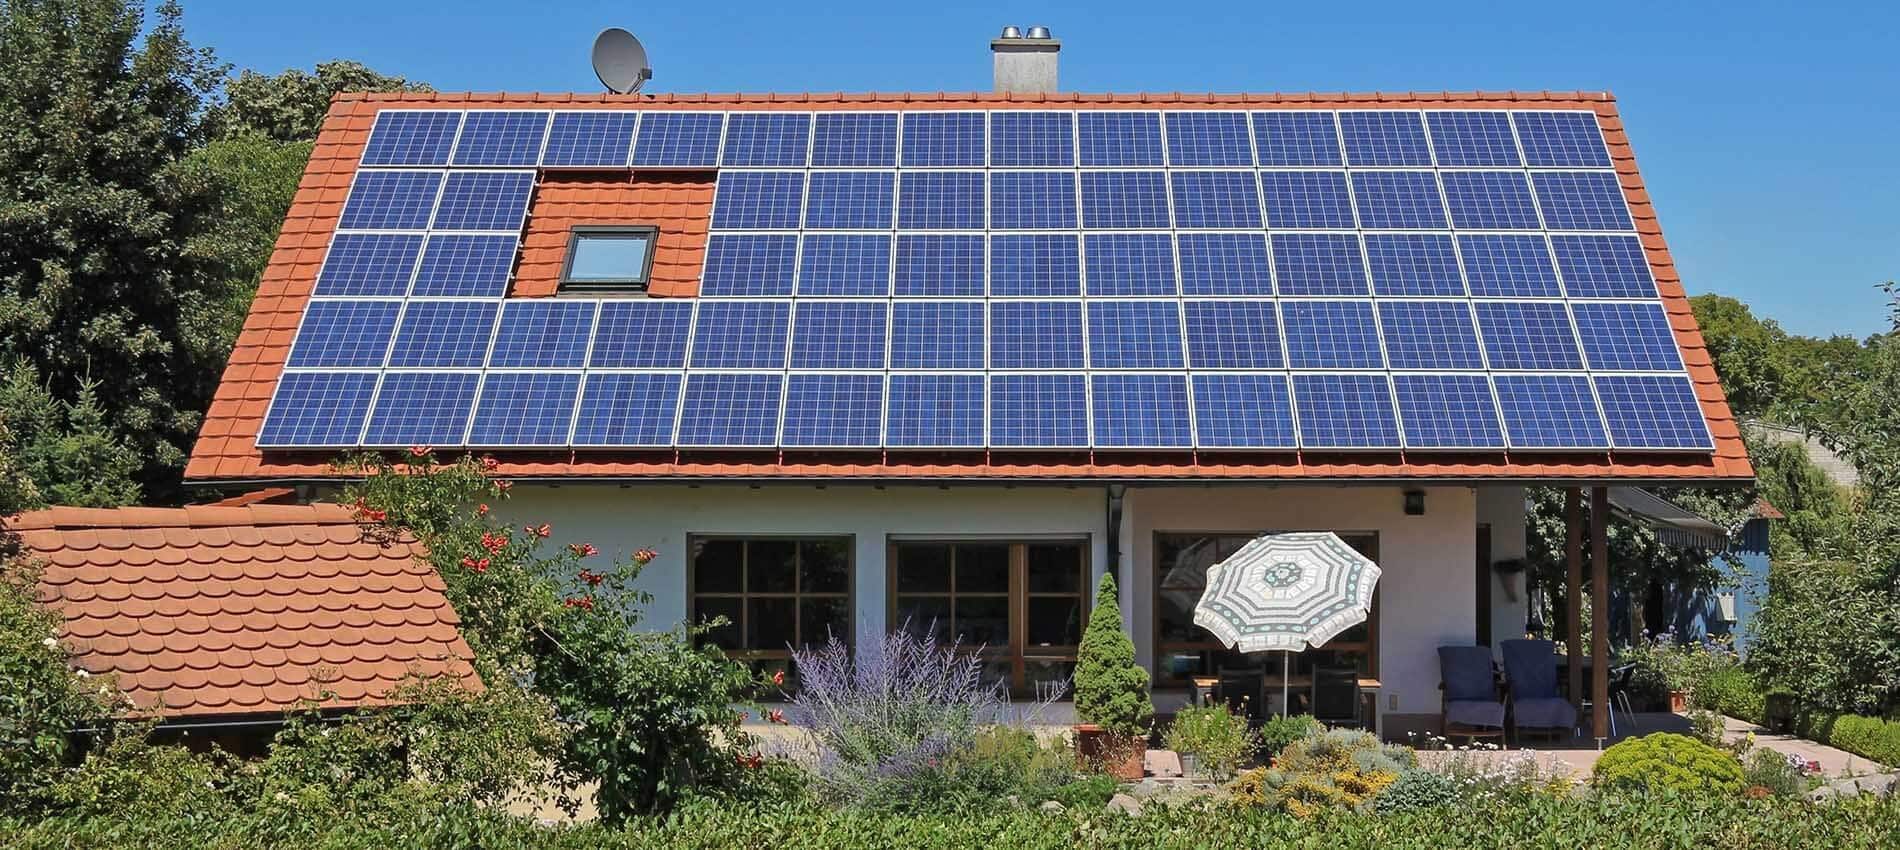 Thinking of installing solar panels on your home? Here are Top Tips!